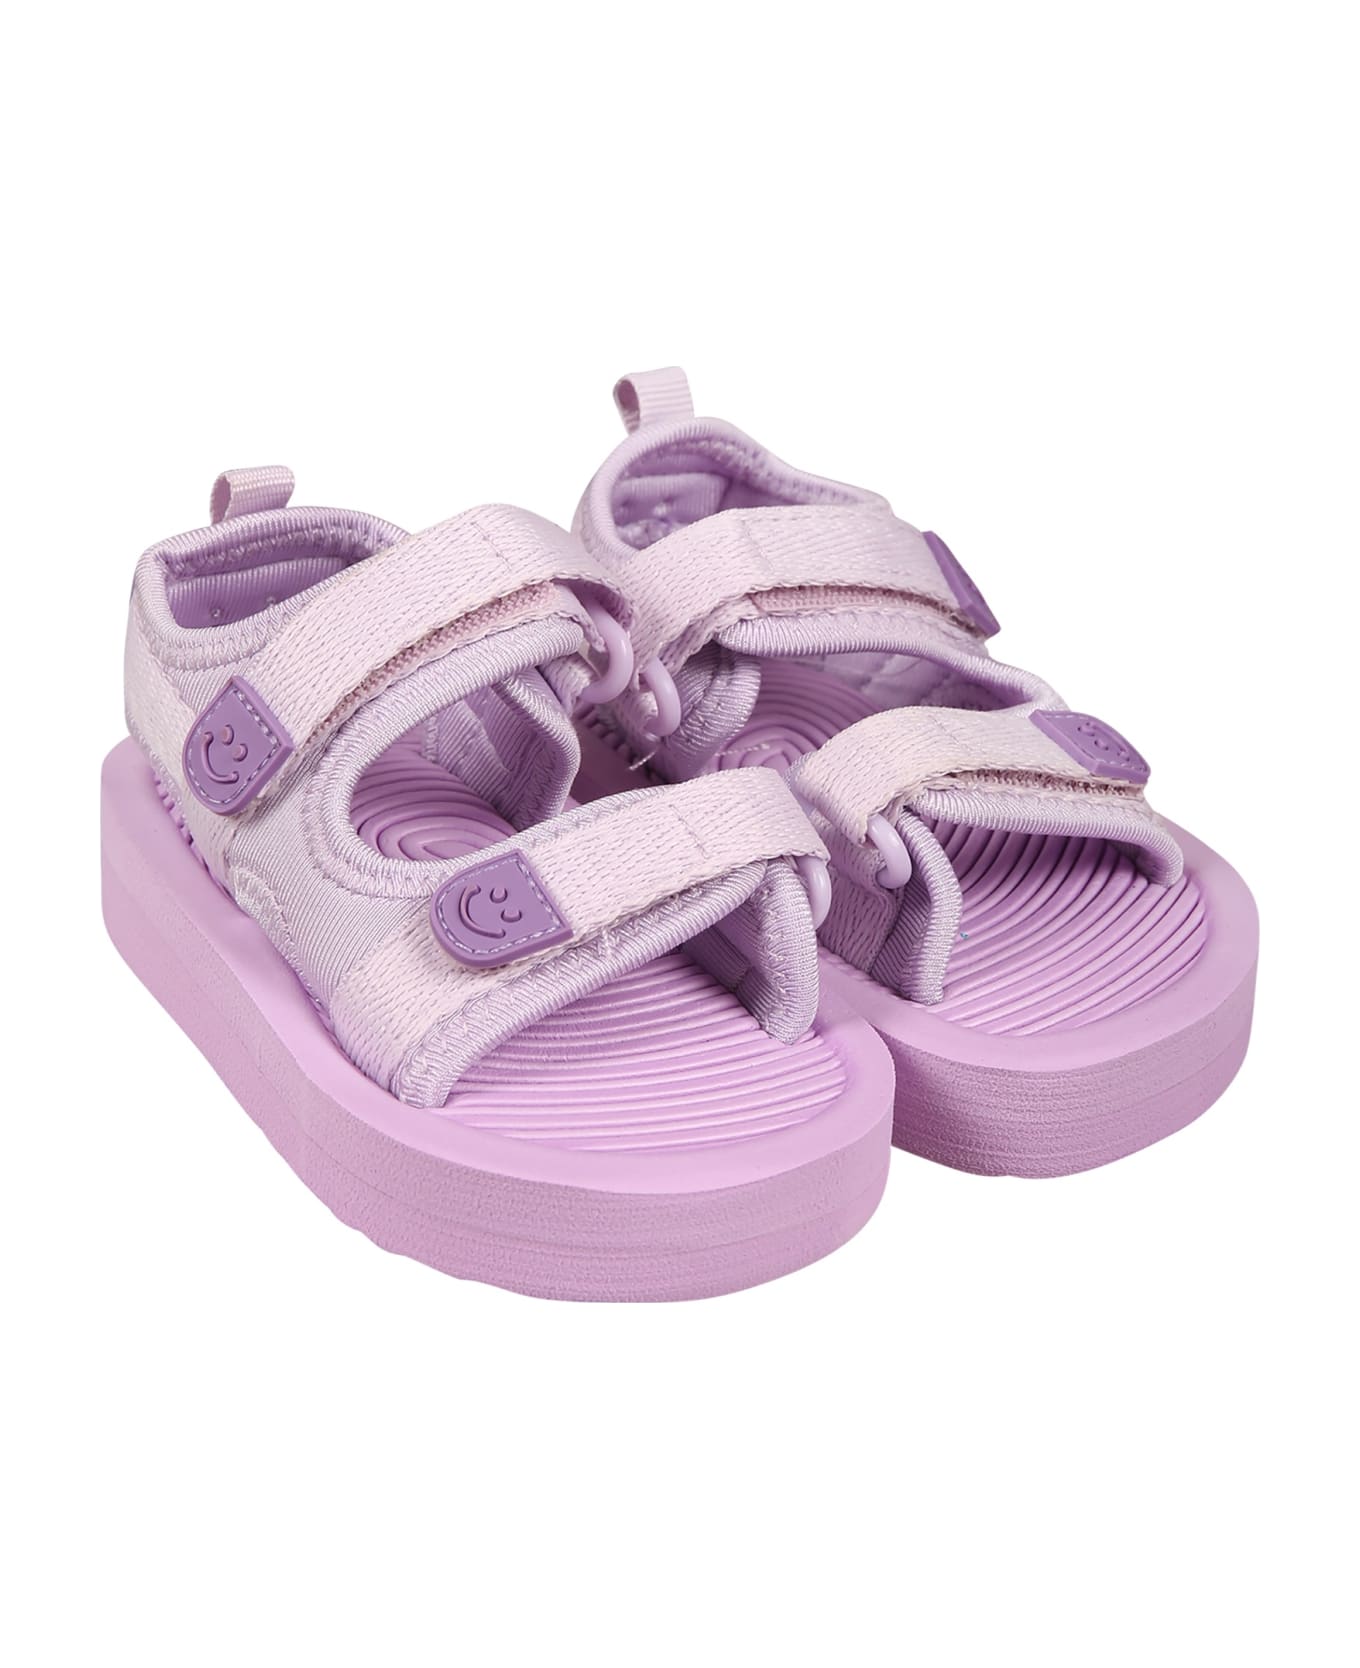 Molo Purple Sandals For Baby Girl With Logo - Violet